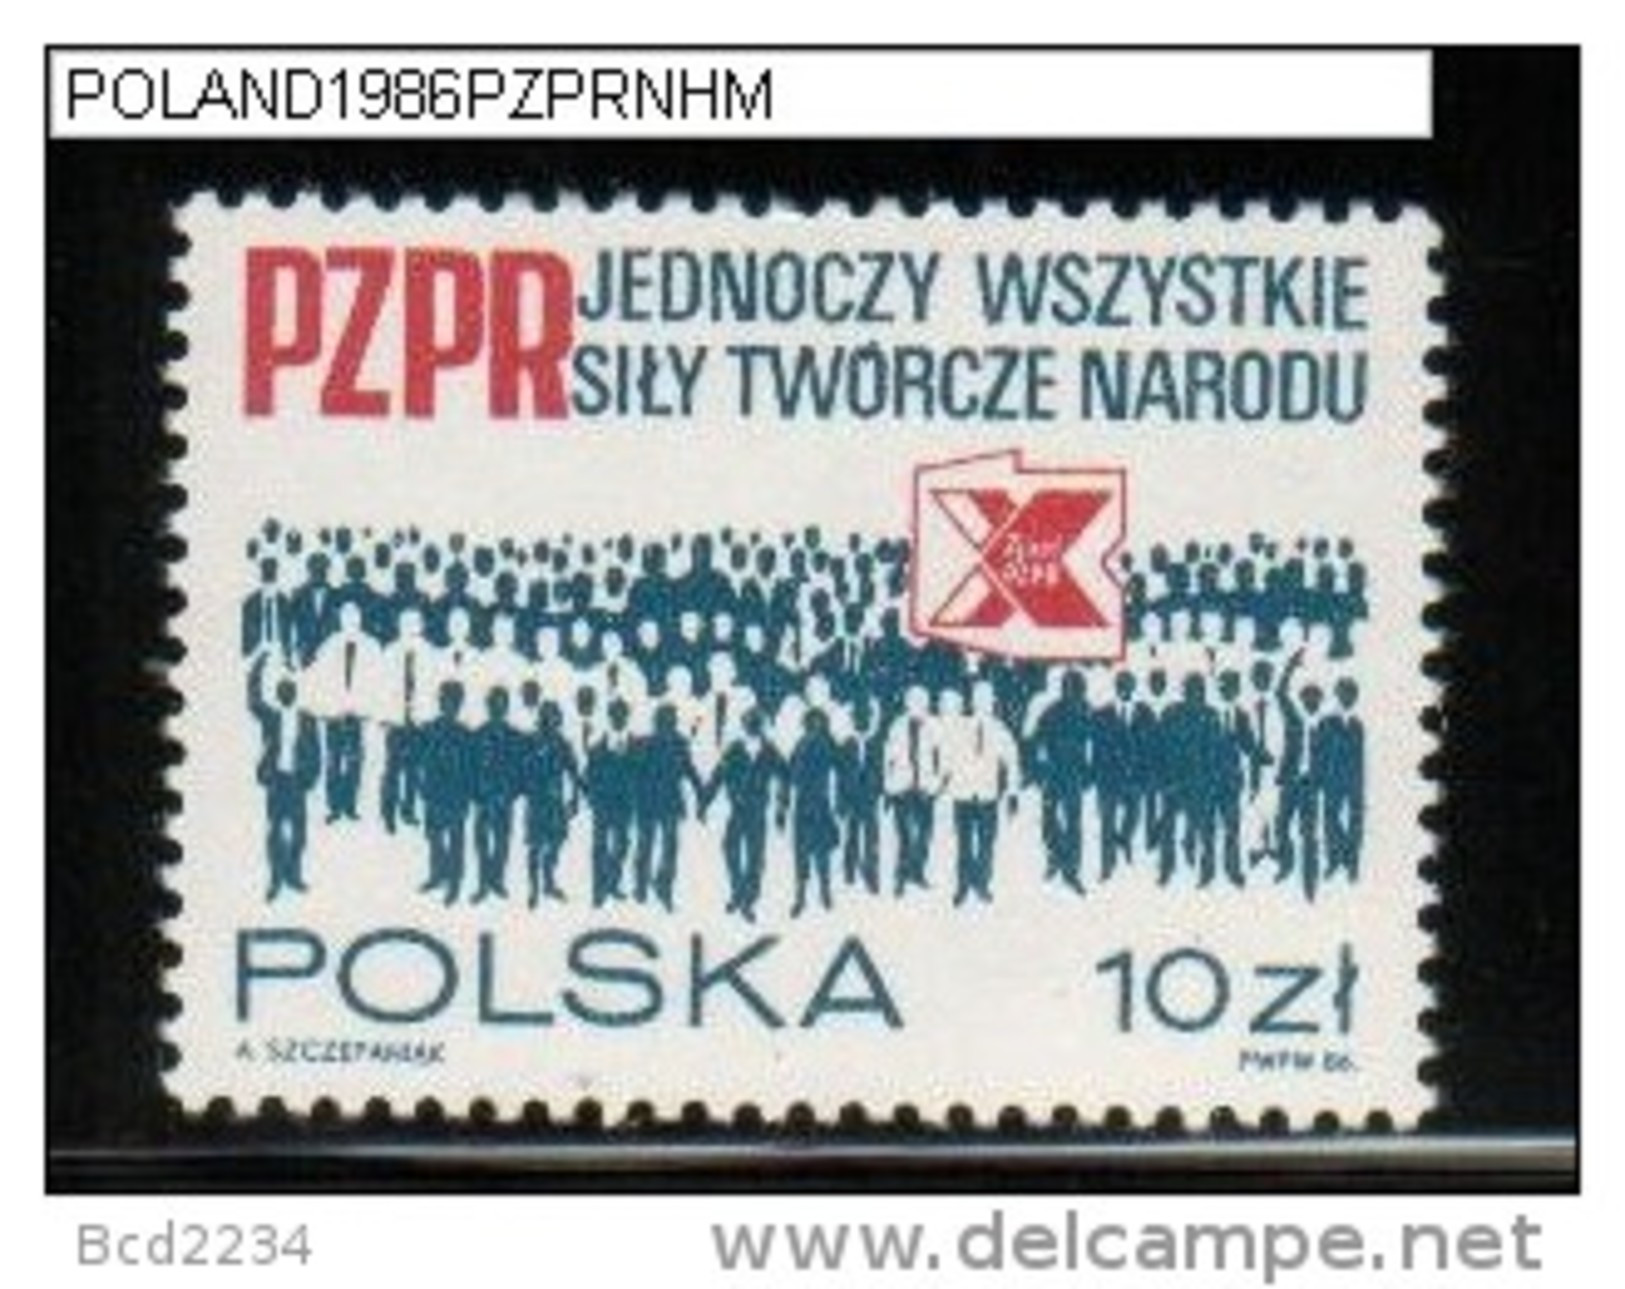 POLAND 1986 10TH PZPR PARTY CONGRESS NHM Polish United Workers Party Communism Socialism Communists Socialists Unions - Neufs